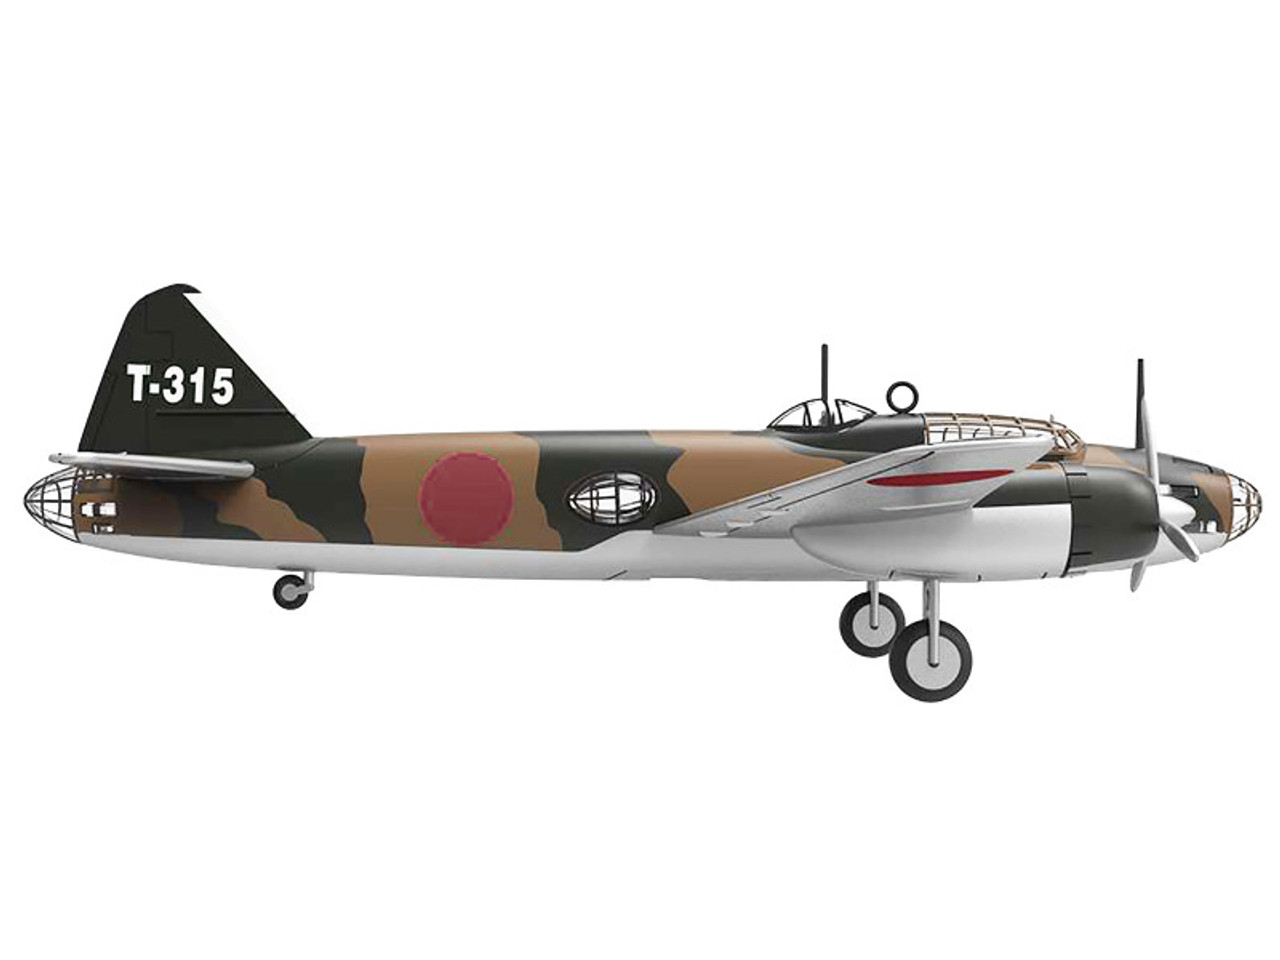 Mitsubishi G4M Bomber Aircraft "Betty Takao Kokutai Philippines" Imperial Japanese Navy (1941) "Planes of World War II" Series 1/144 Diecast Model Airplane by Luppa